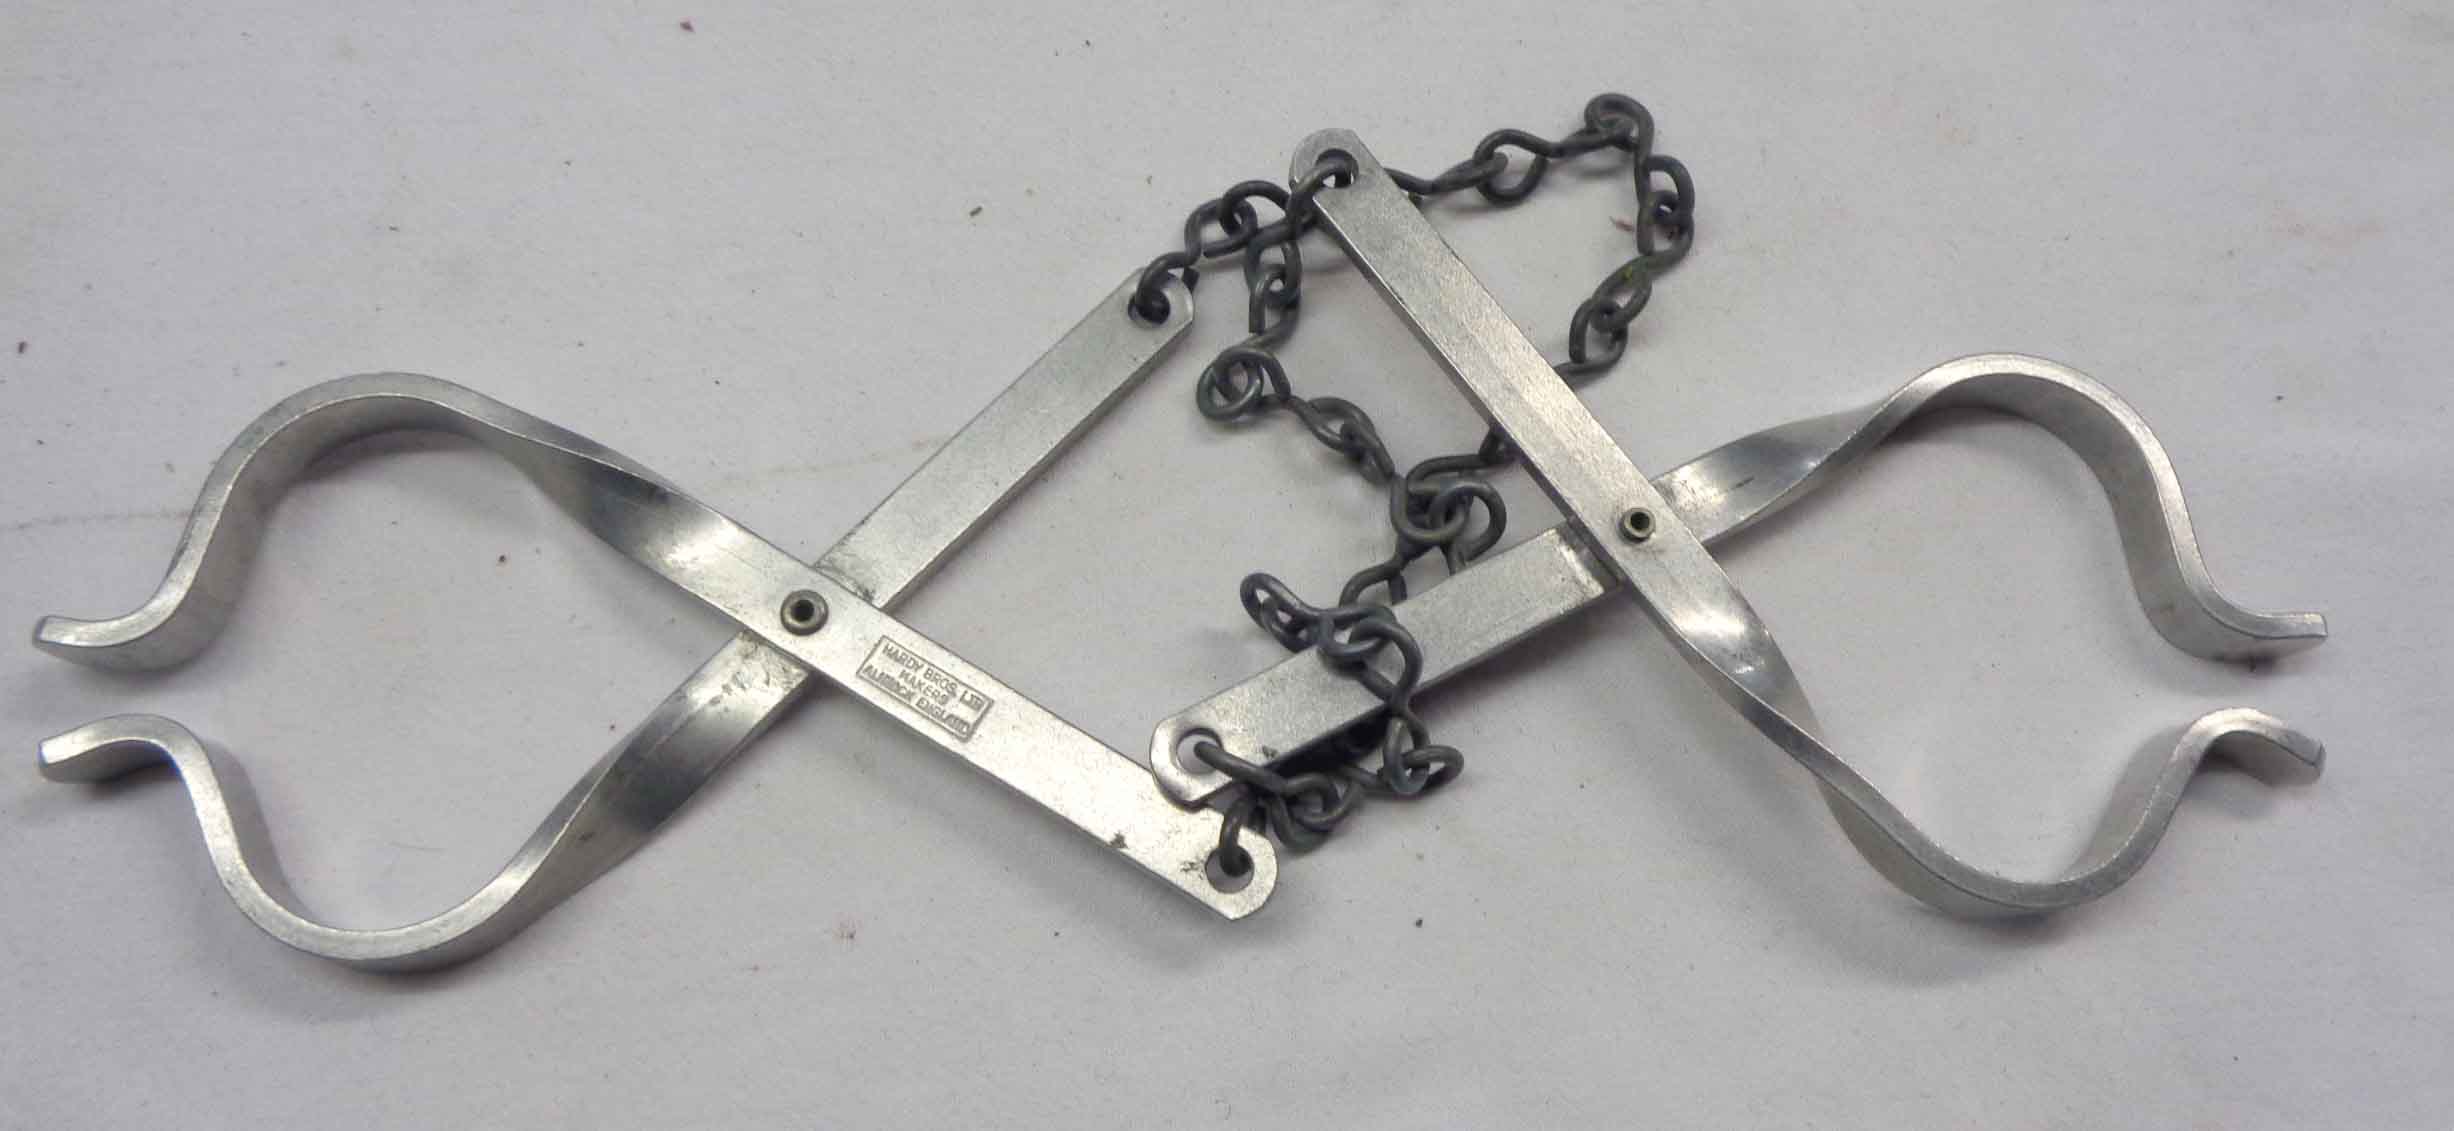 A pair of Hardy's Bros., Alnwick wader clamp hangers